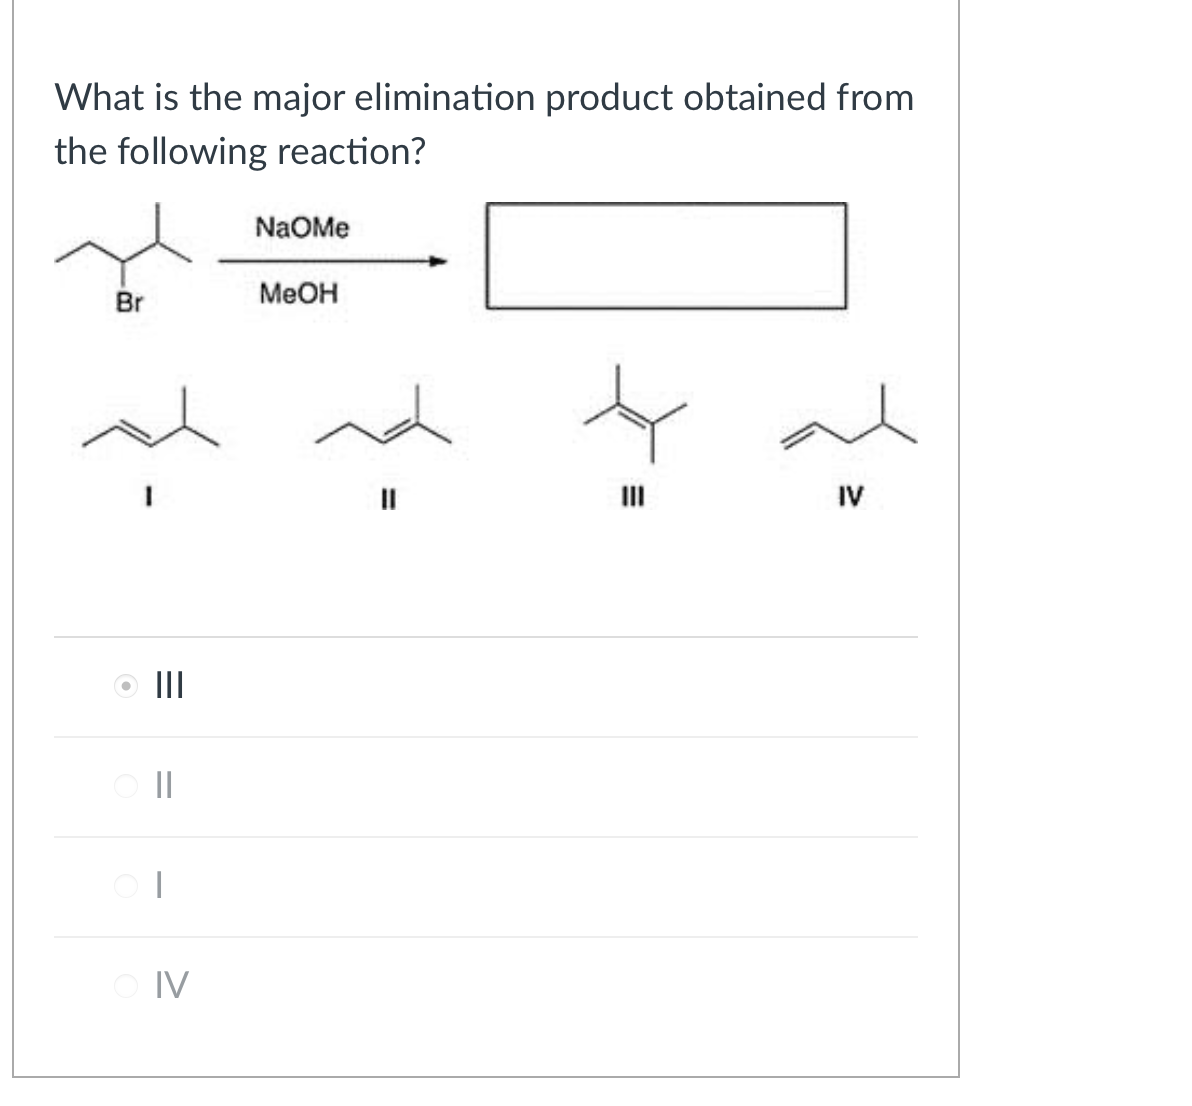 What is the major elimination product obtained from
the following reaction?
NaOMe
Br
MeOH
|||
||
O IV
II
IV